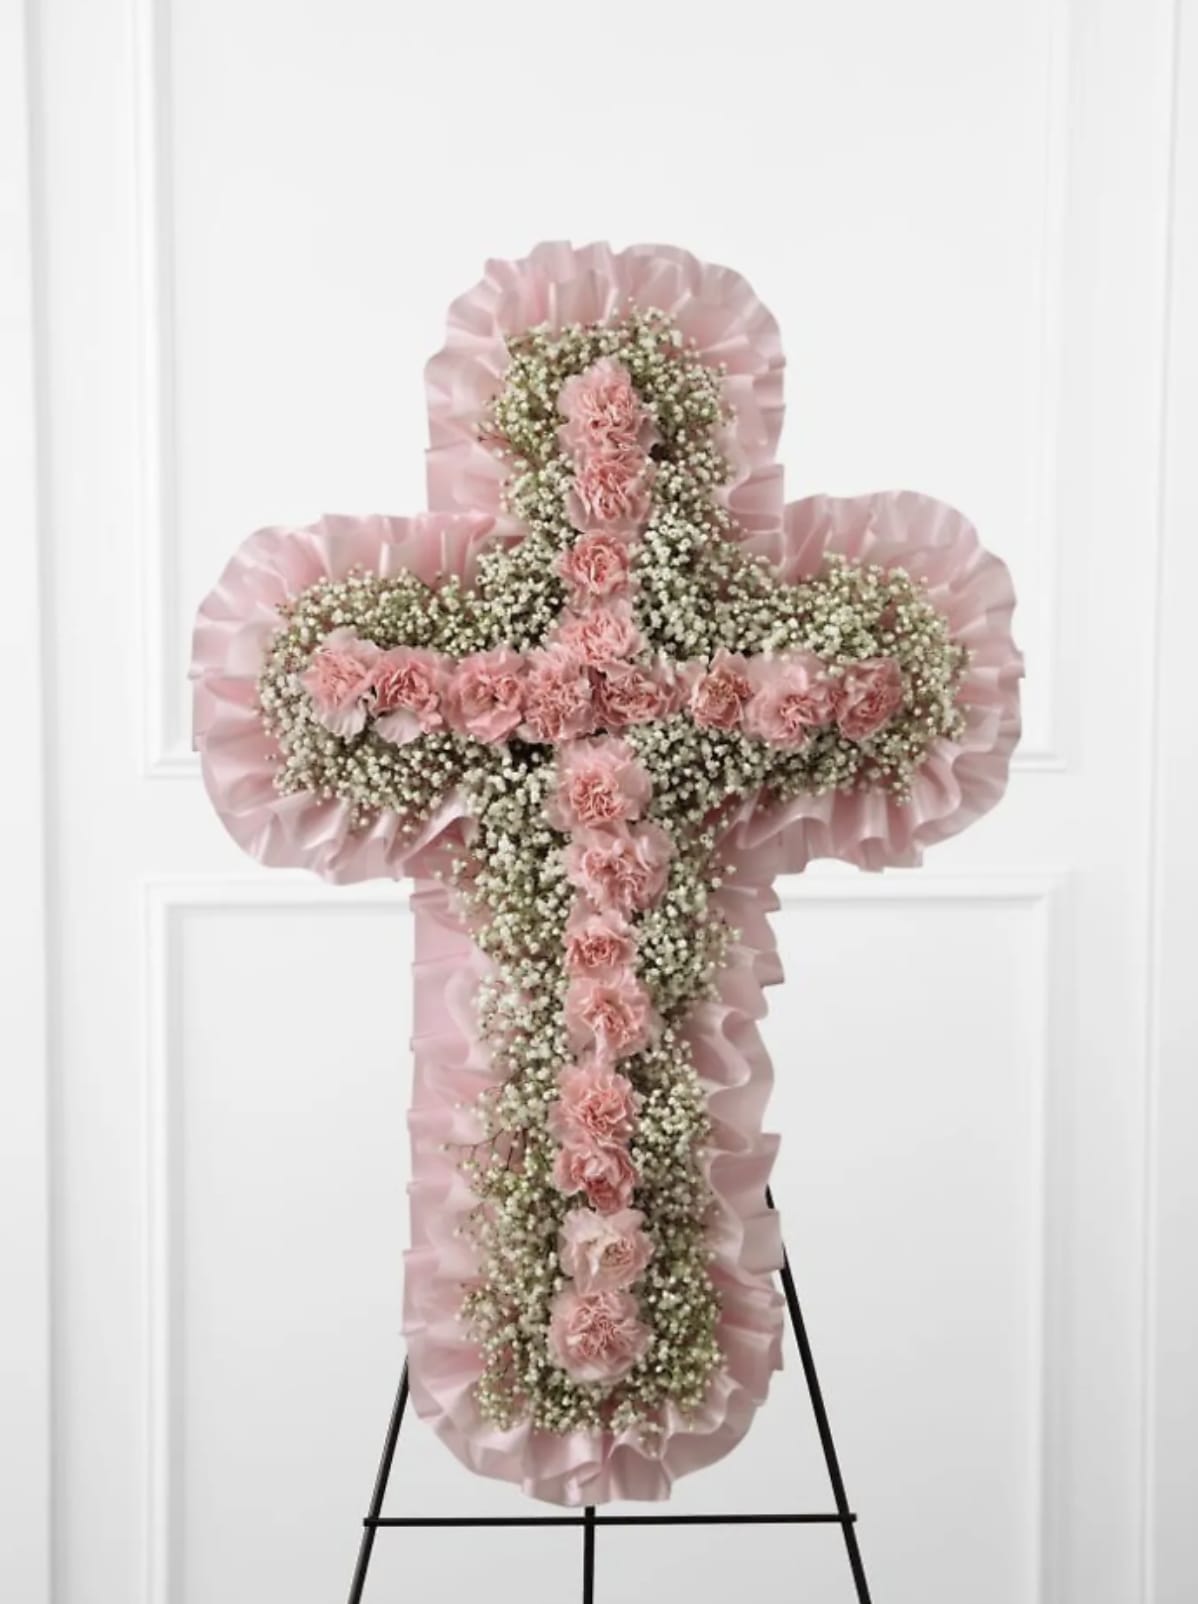 Heaven's Cross - The Heaven's Cross Easel is a graceful tribute to honor the life and faith of the deceased. Pink mini carnations and baby's breath are lovingly arranged in the shape of a cross accented with a pink satin ribbon around the outside and displayed on a wire easel to create a wonderful way to express your love for the departed.